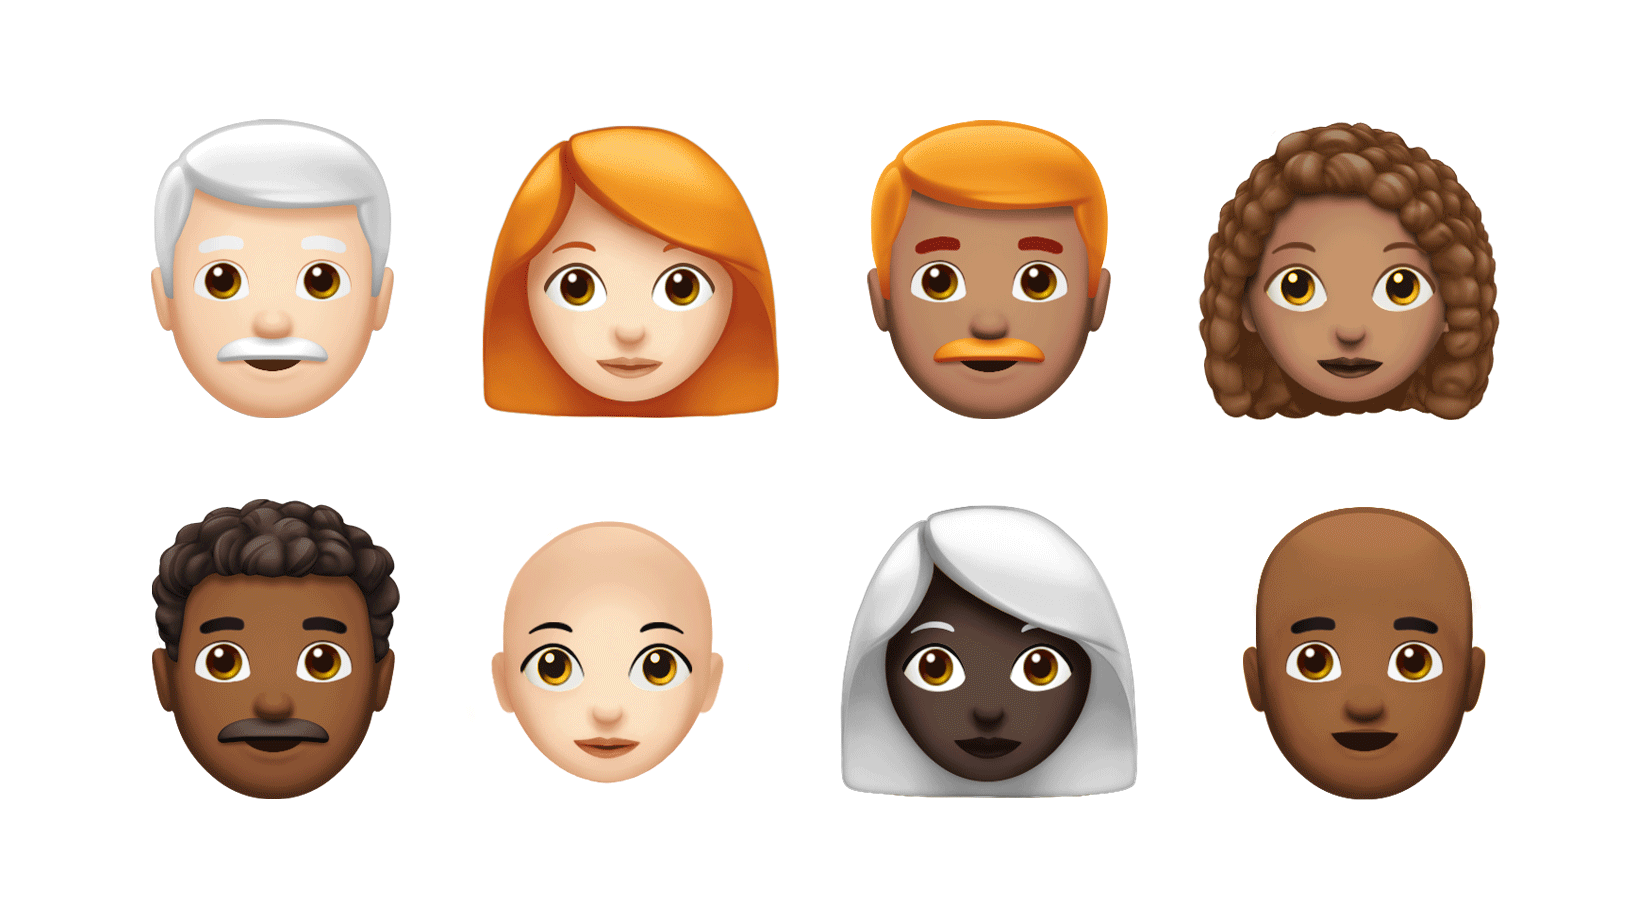 Apple animated GIF of new hair options for emojis in iOS 12